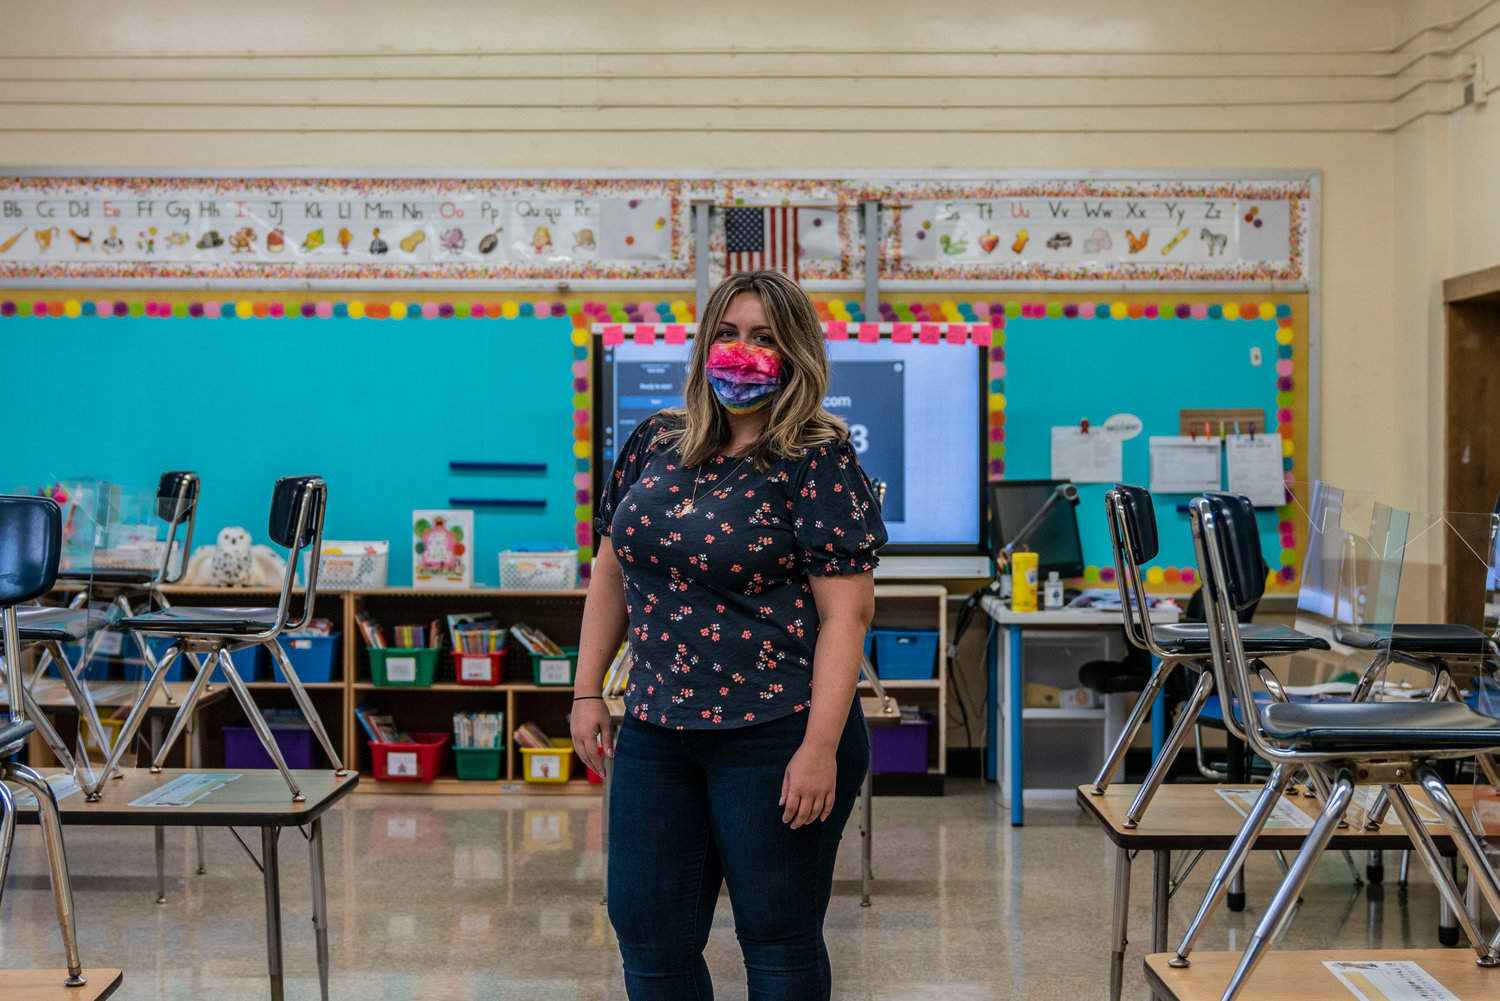 Kindergarten teacher Aleashia Castello’s first year at P.S. 24 Spuyten Duyvil kicked off with a bang. Over the course of a week, public schools reopened across the city, only for some of them in hotspots to once again close only days later.